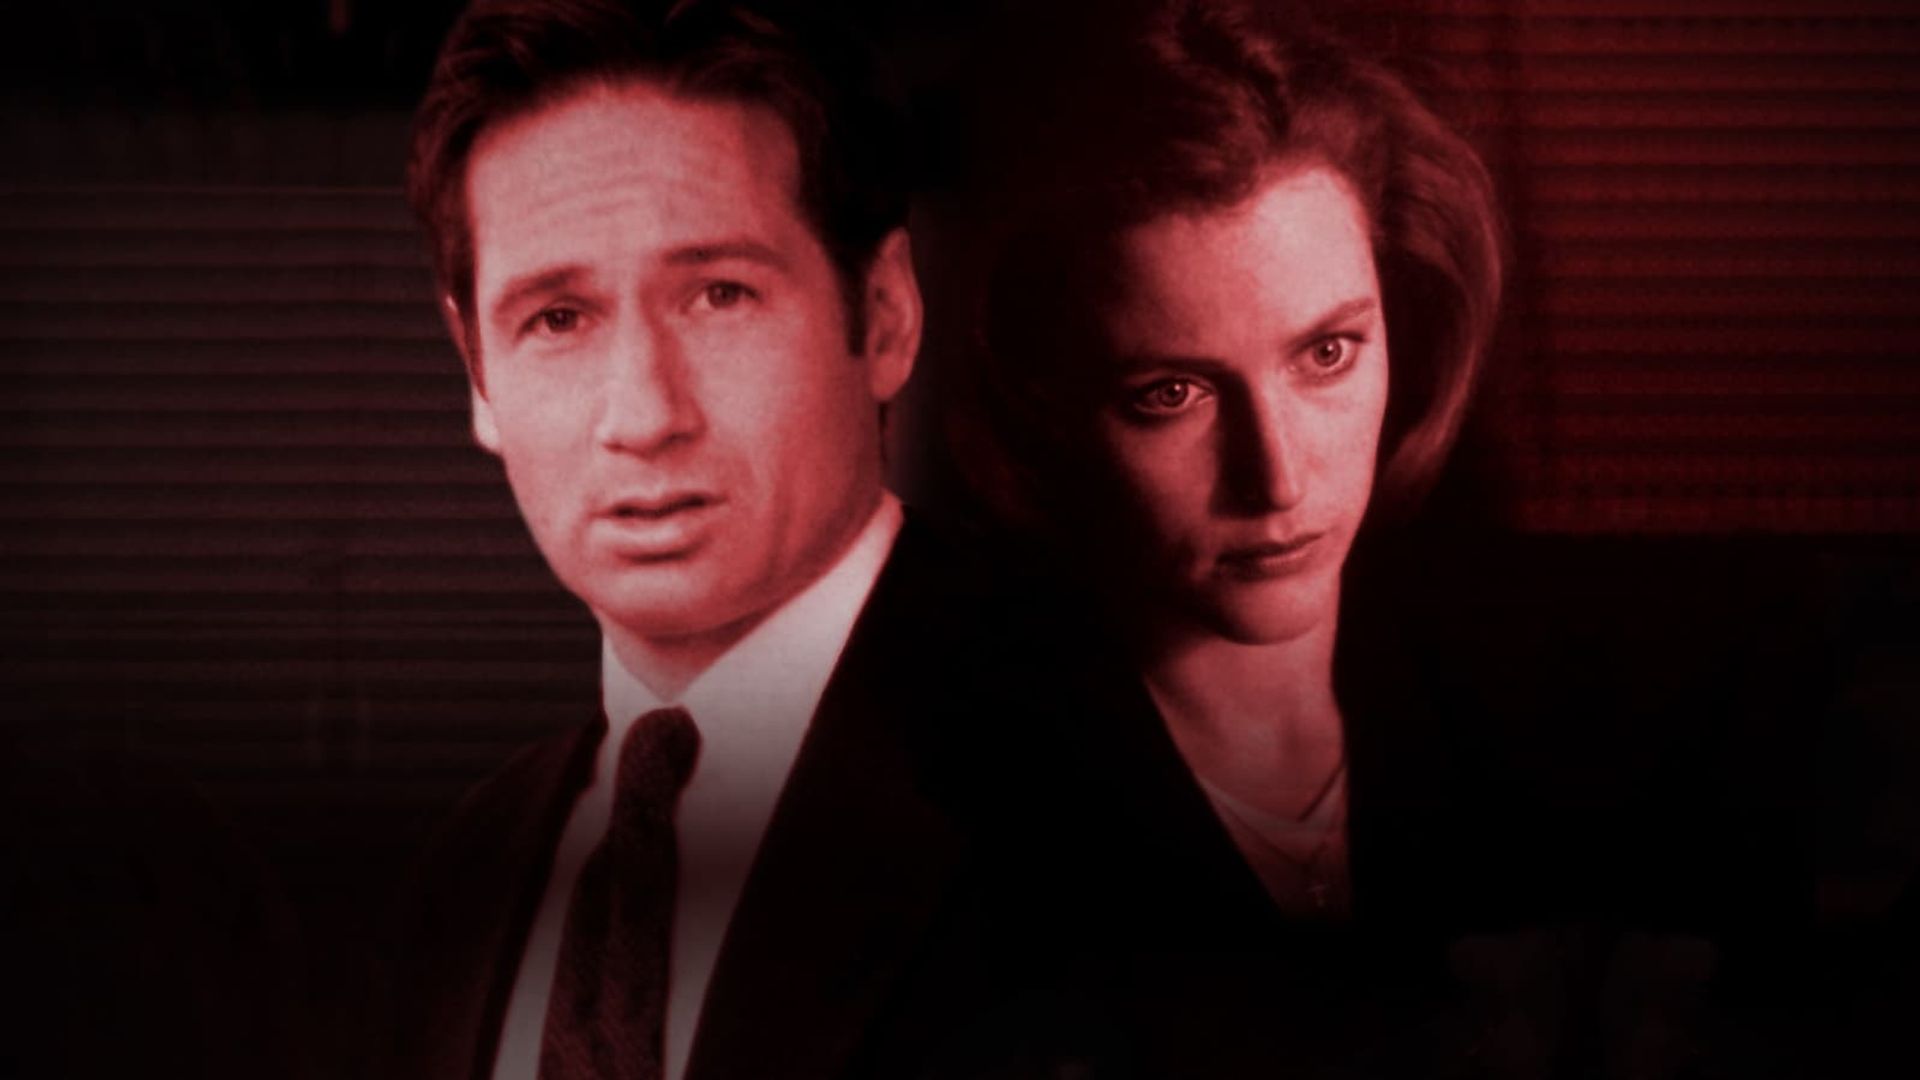 Inside the X Files background